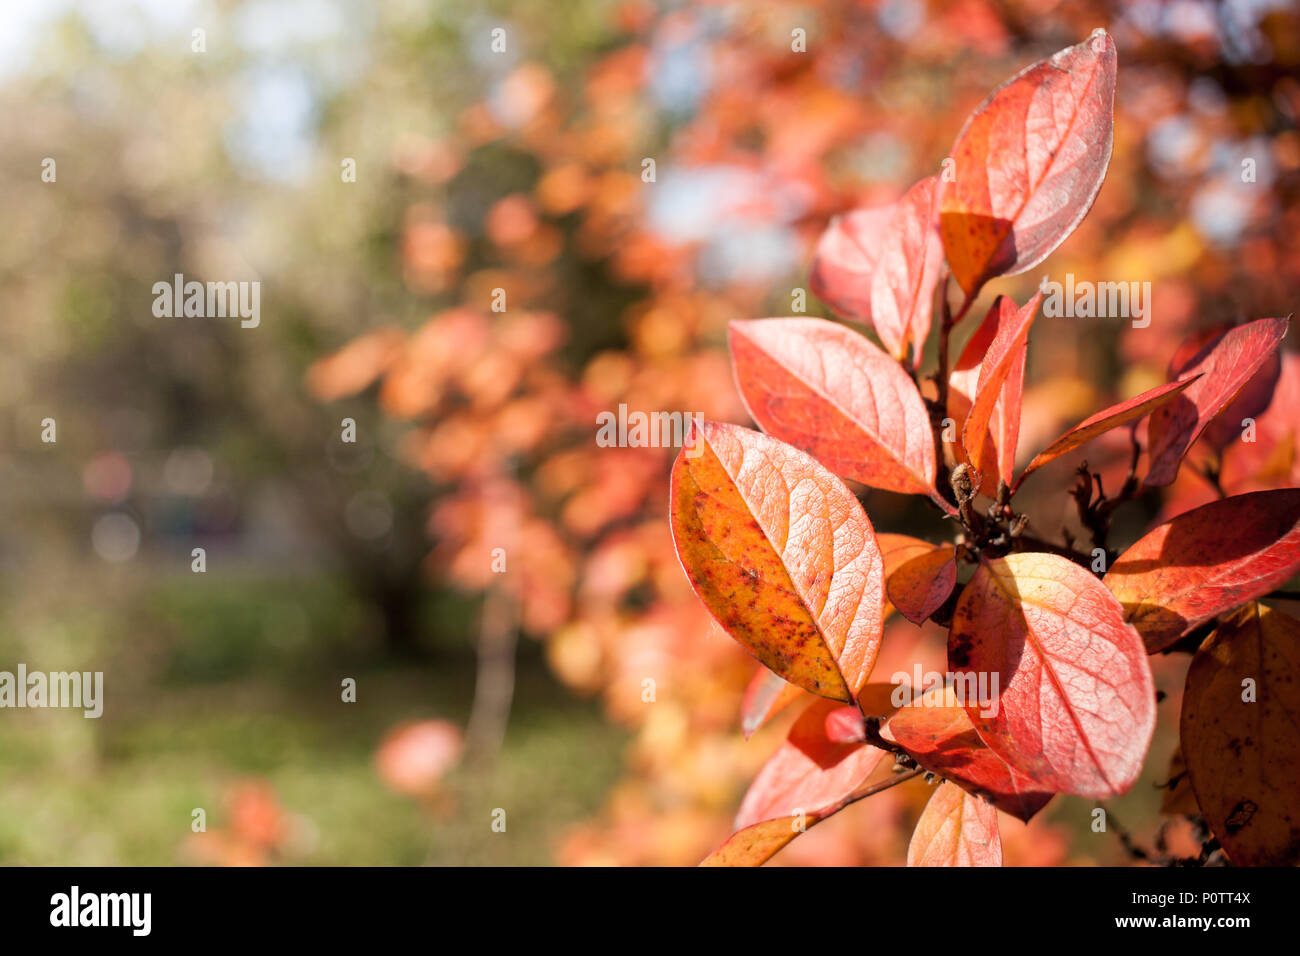 Blurred autumn forest with selective focus on bright orange leaves in the foreground. Stock Photo